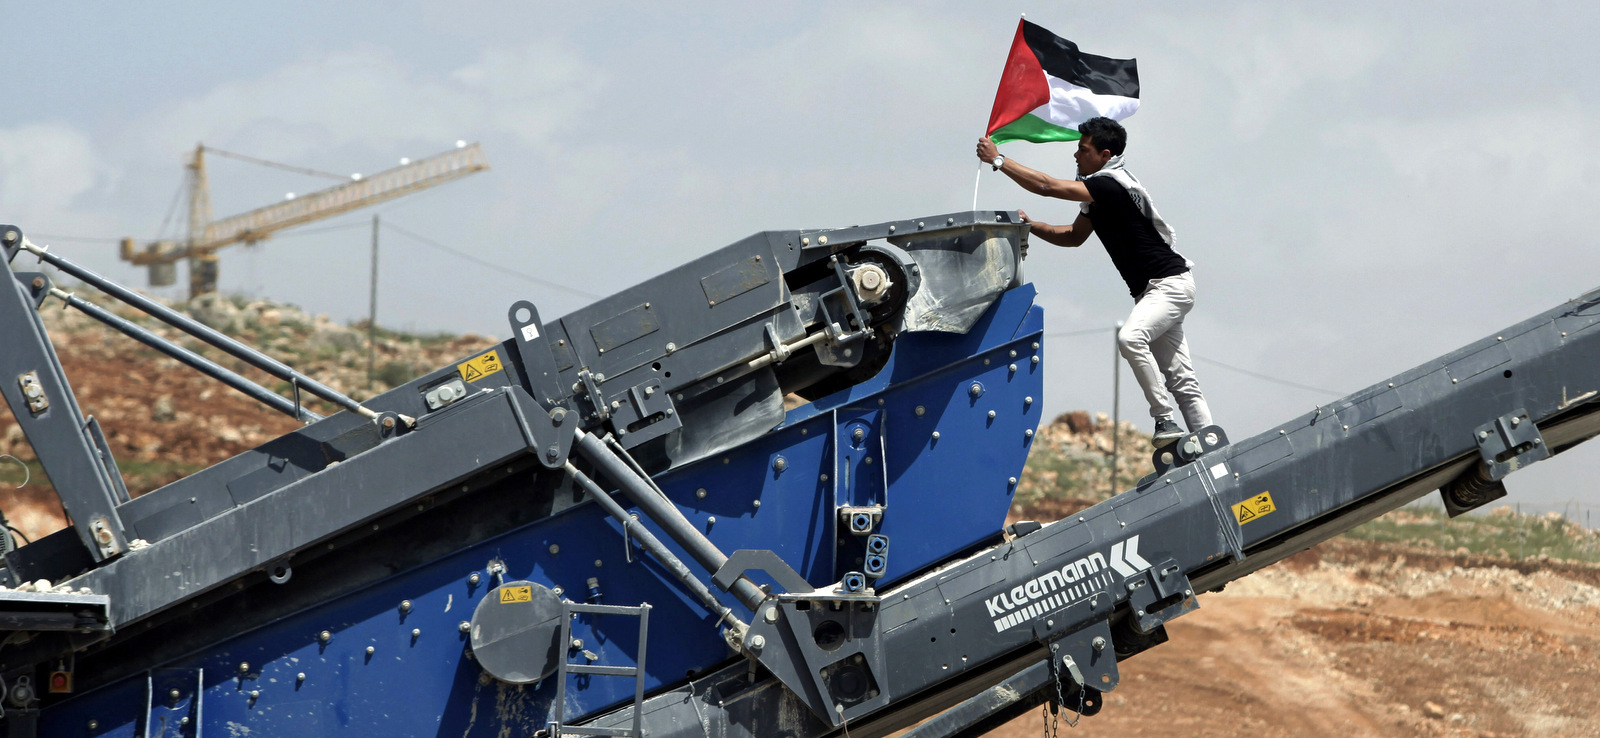 A protester posts a Palestinian flag on Israeli construction equipment at a building site adjacent to the Israeli settlement of Beitar Illit during a protest marking Land Day, in the village of Wadi Fukin, near the West Bank city of Bethlehem, March 30, 2015. (AP/Mahmoud Illean)